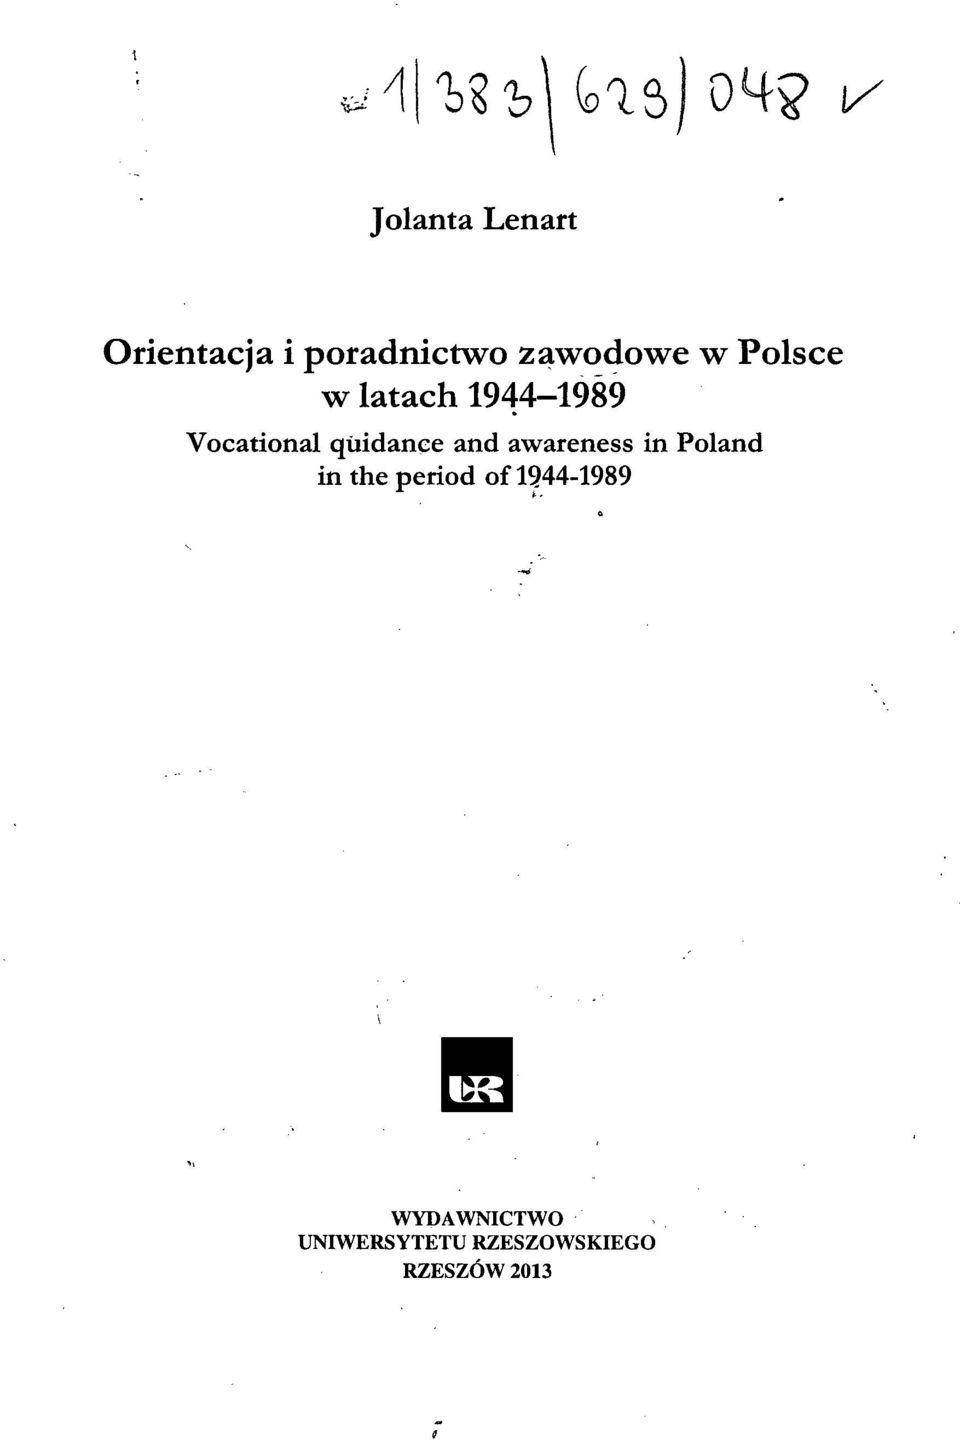 and awareness in Poland in the period of